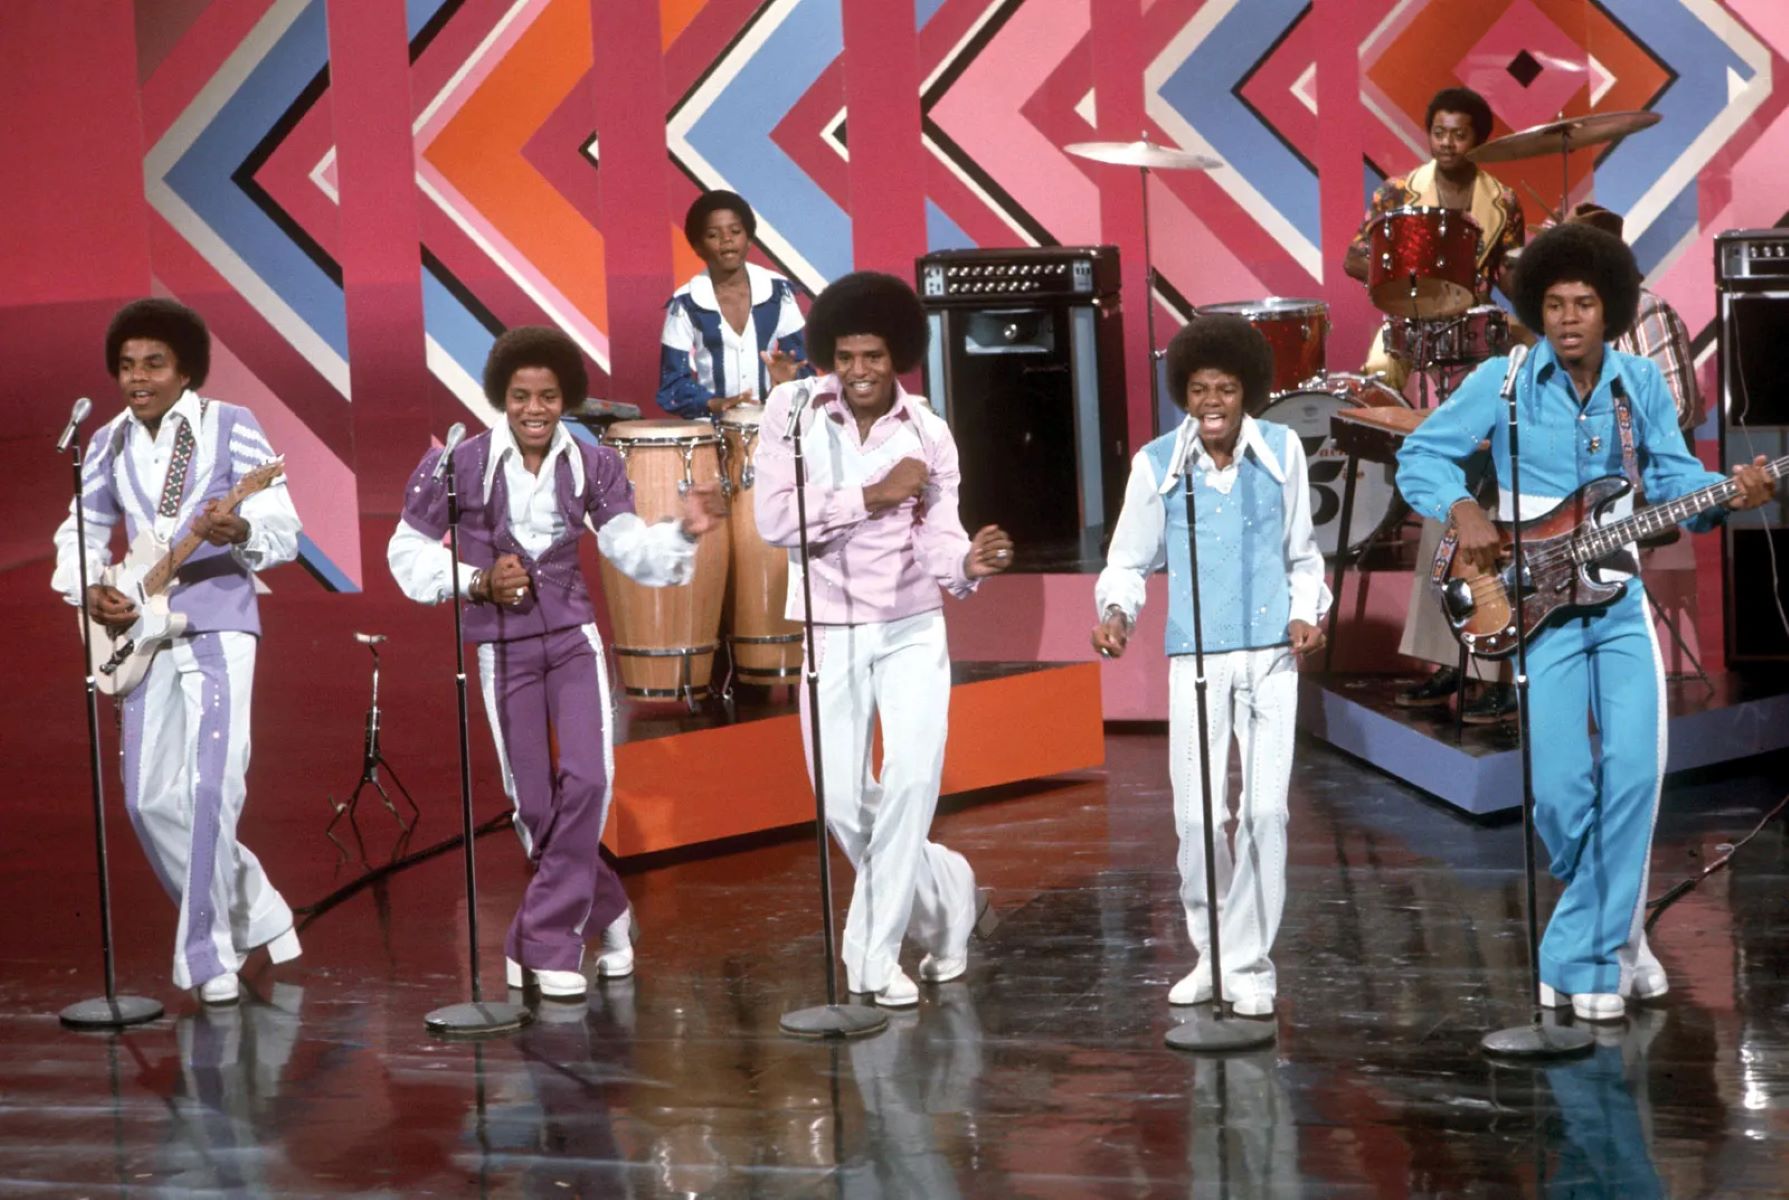 Which Record Label Did The Jackson 5 Record For